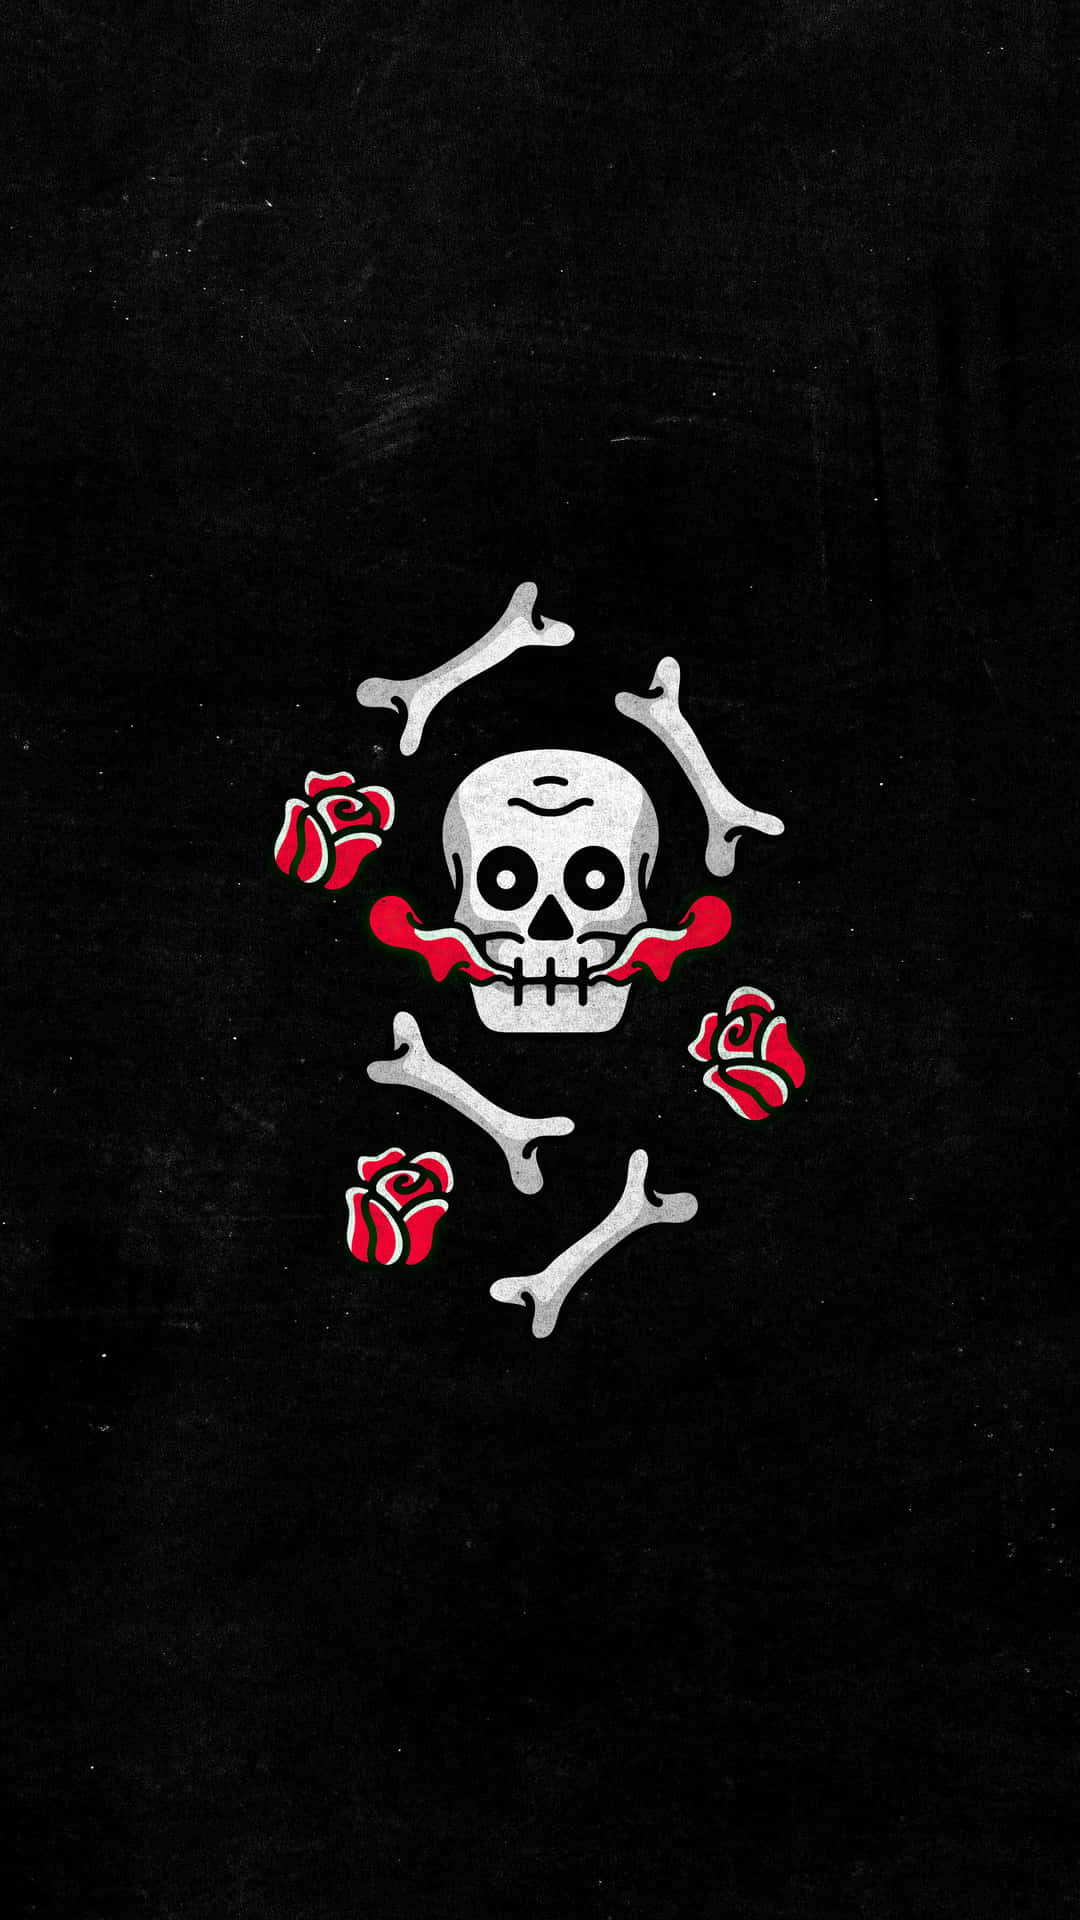 A Skull And Bones With Red And White Hearts Wallpaper